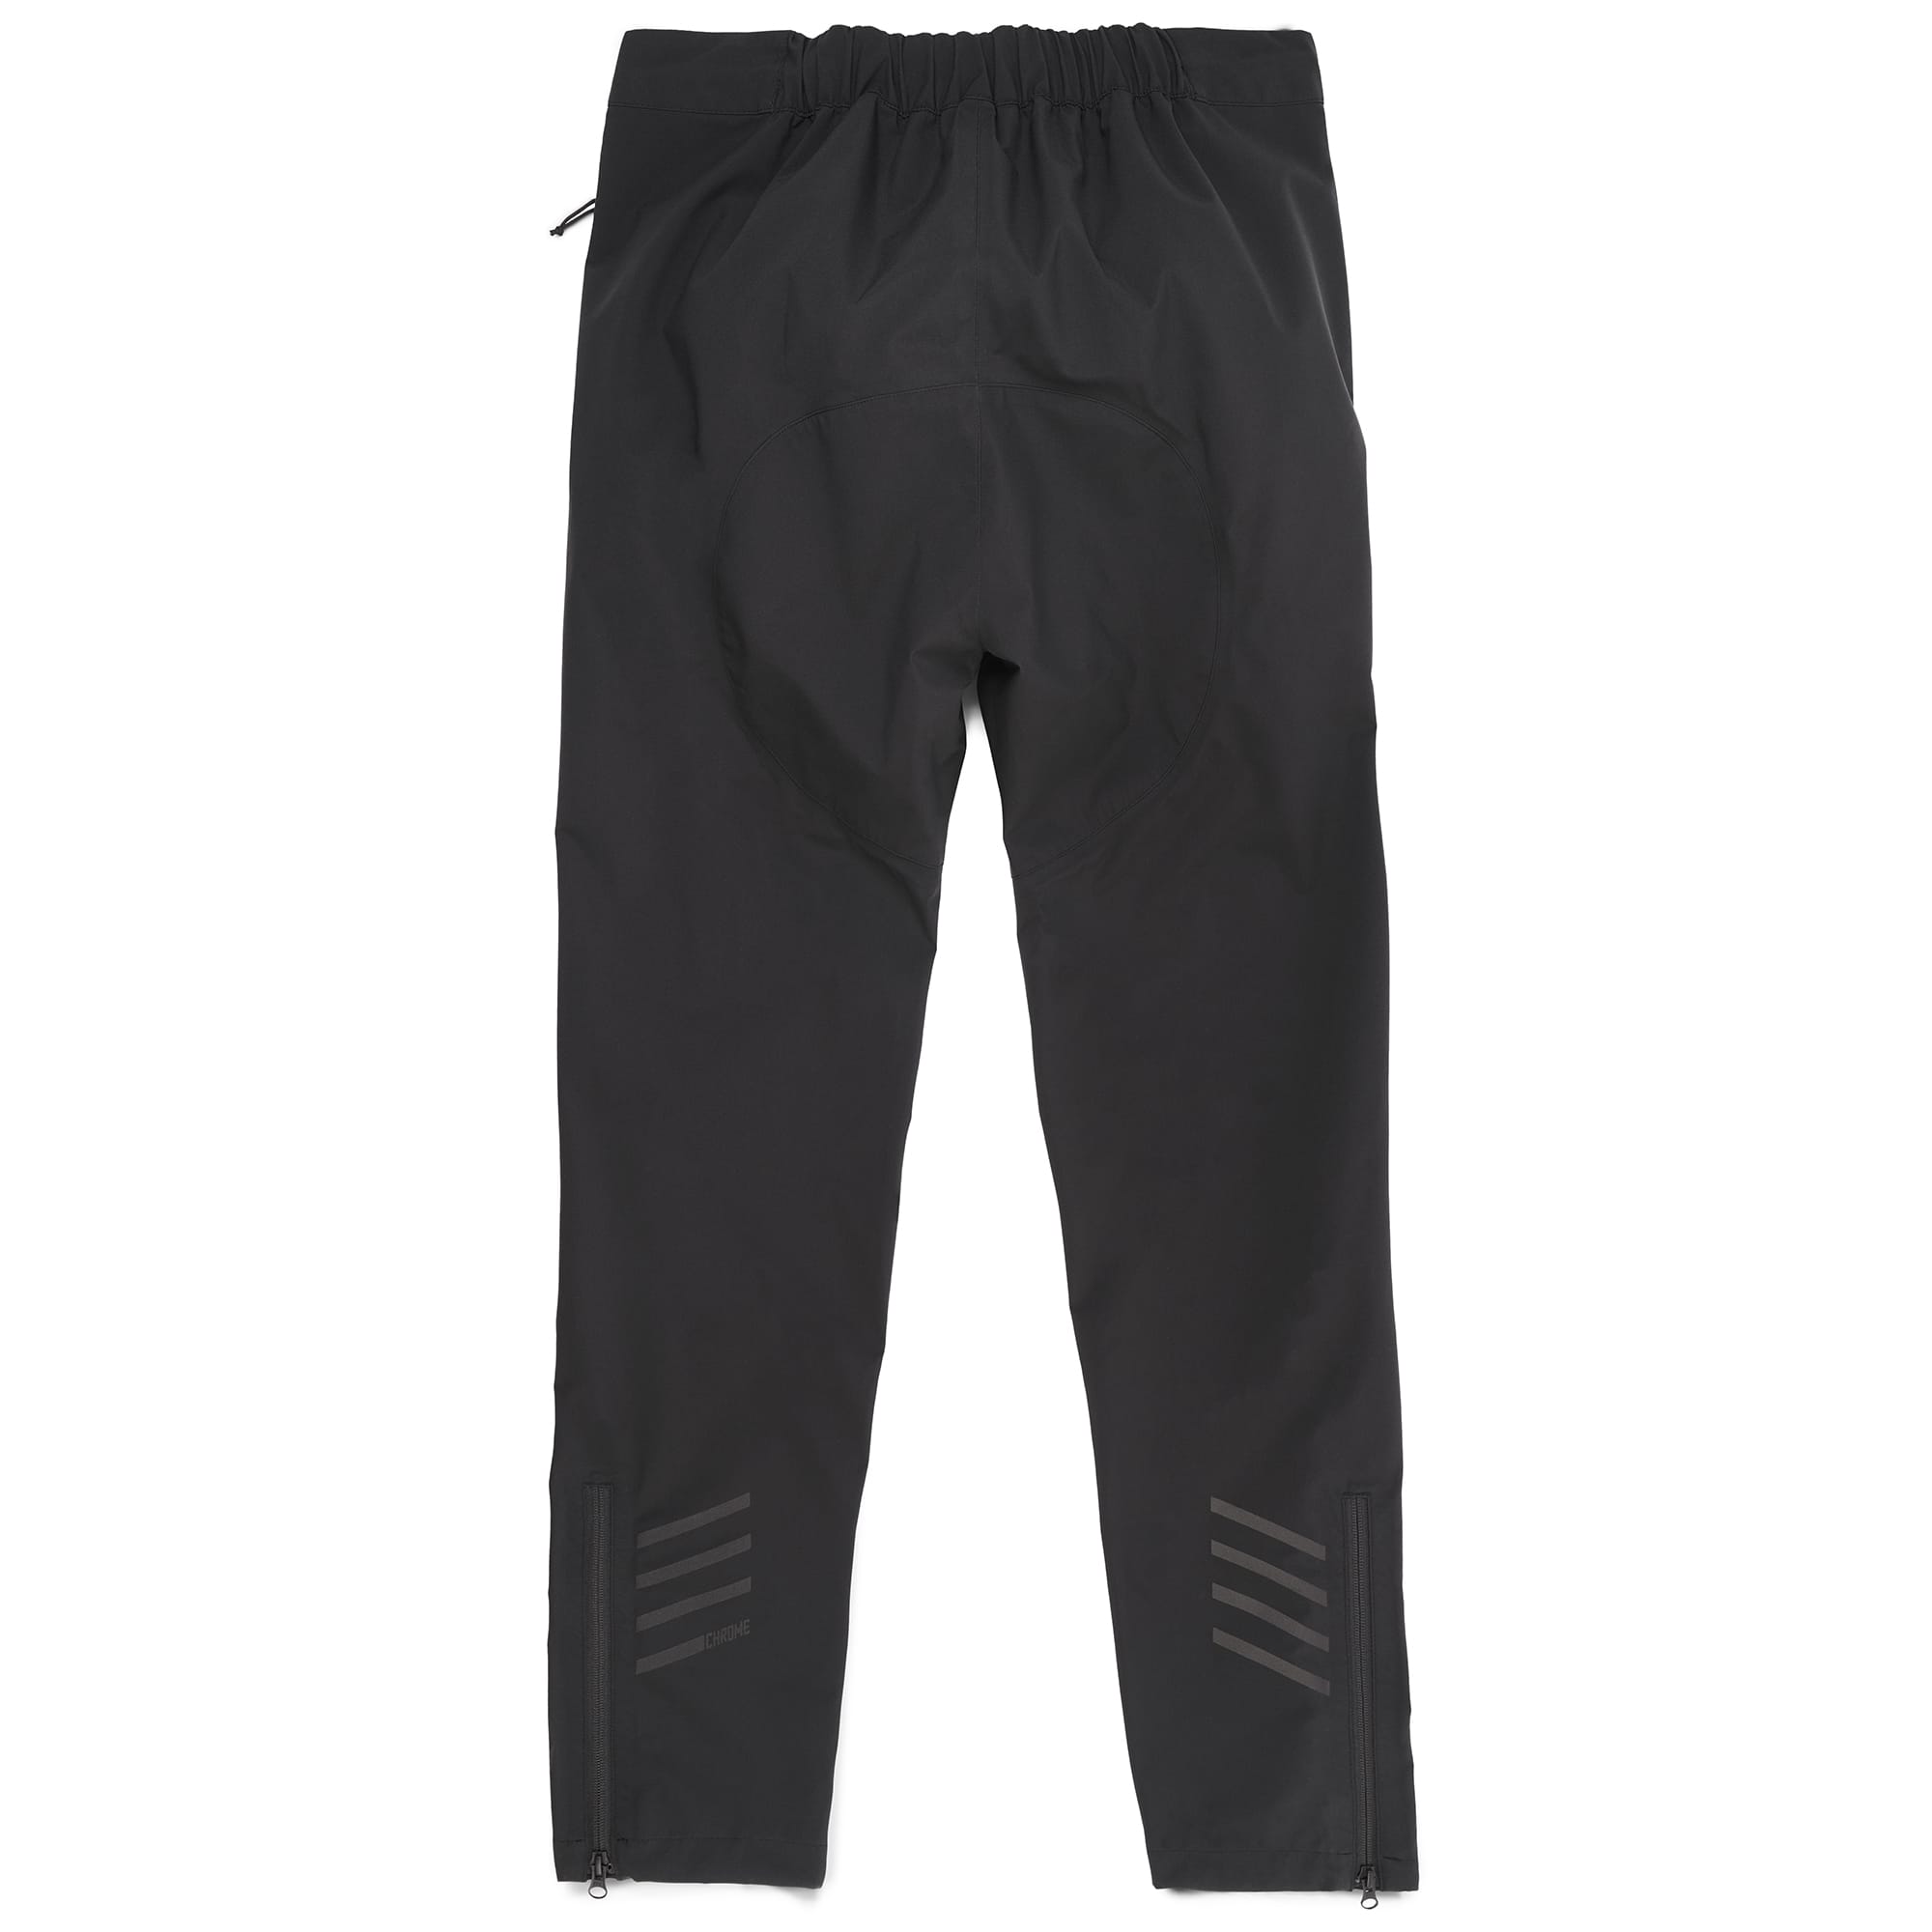 CHROES® Men's Polyester Loose Fit Track Pants/Jogger Pants Black